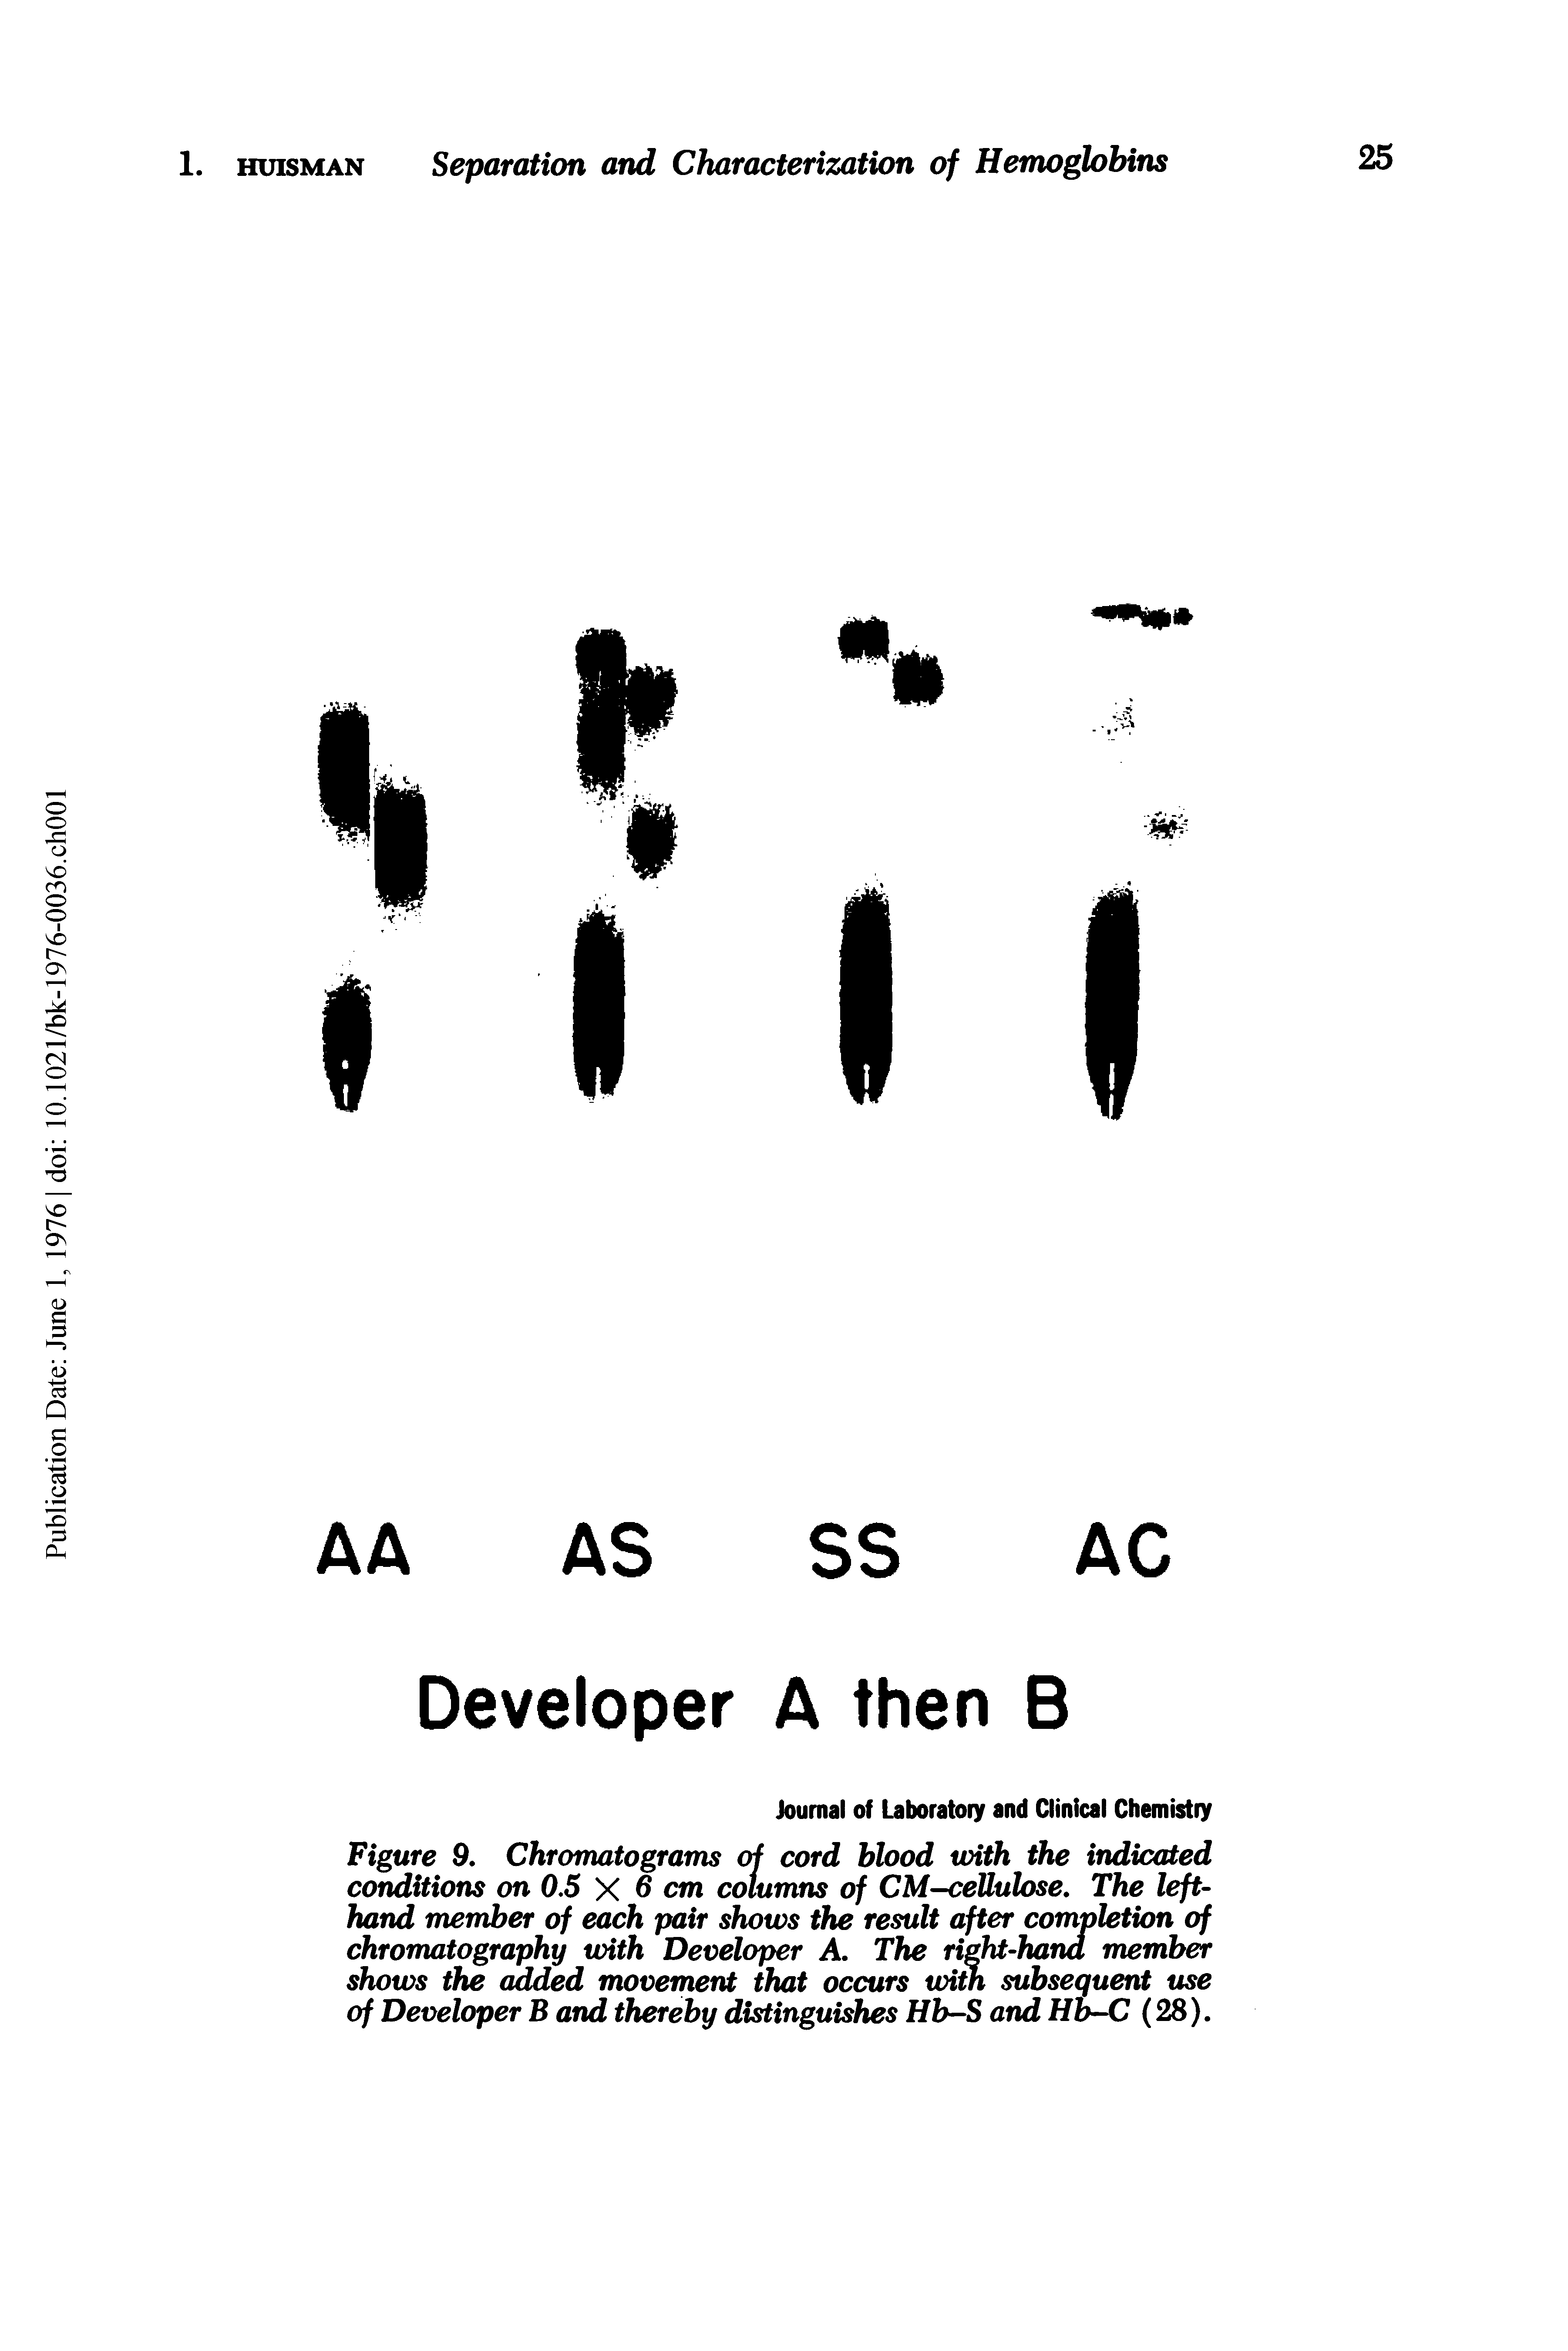 Figure 9. Chromatograms of cord blood with the indicated conditions on 0,5 X 6 cm columns of CM-ceUuhse, The left-hand member of each pair shows the result after completion of chromatography with Developer A. The right-hand member shows the added movement that occurs with subsequent use of Developer B and thereby distinguishes Hb-S and Hb-C (28).